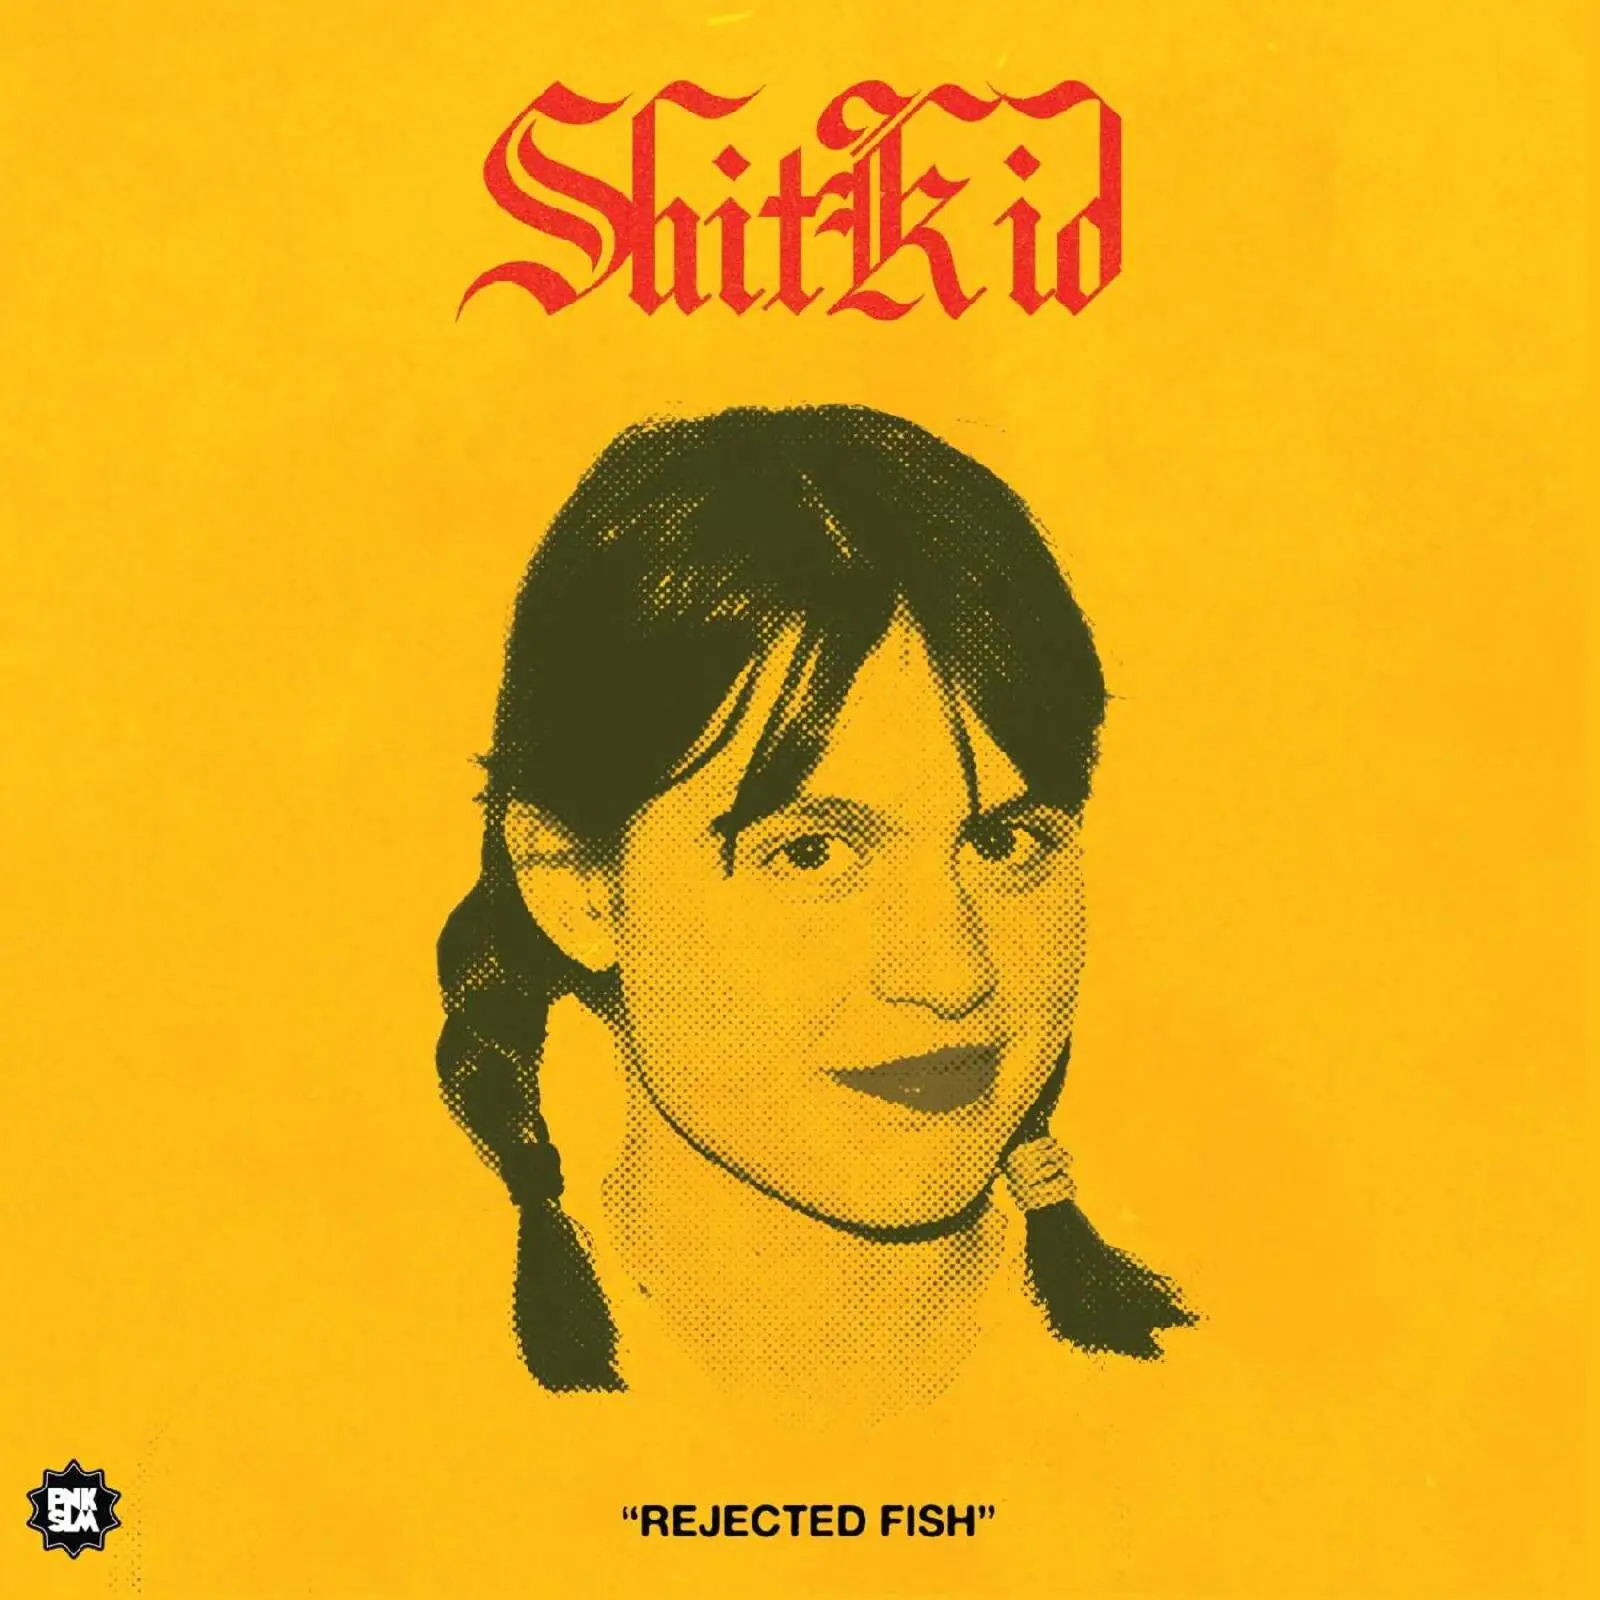 <strong>ShitKid - Rejected Fish</strong> (Vinyl LP - black)